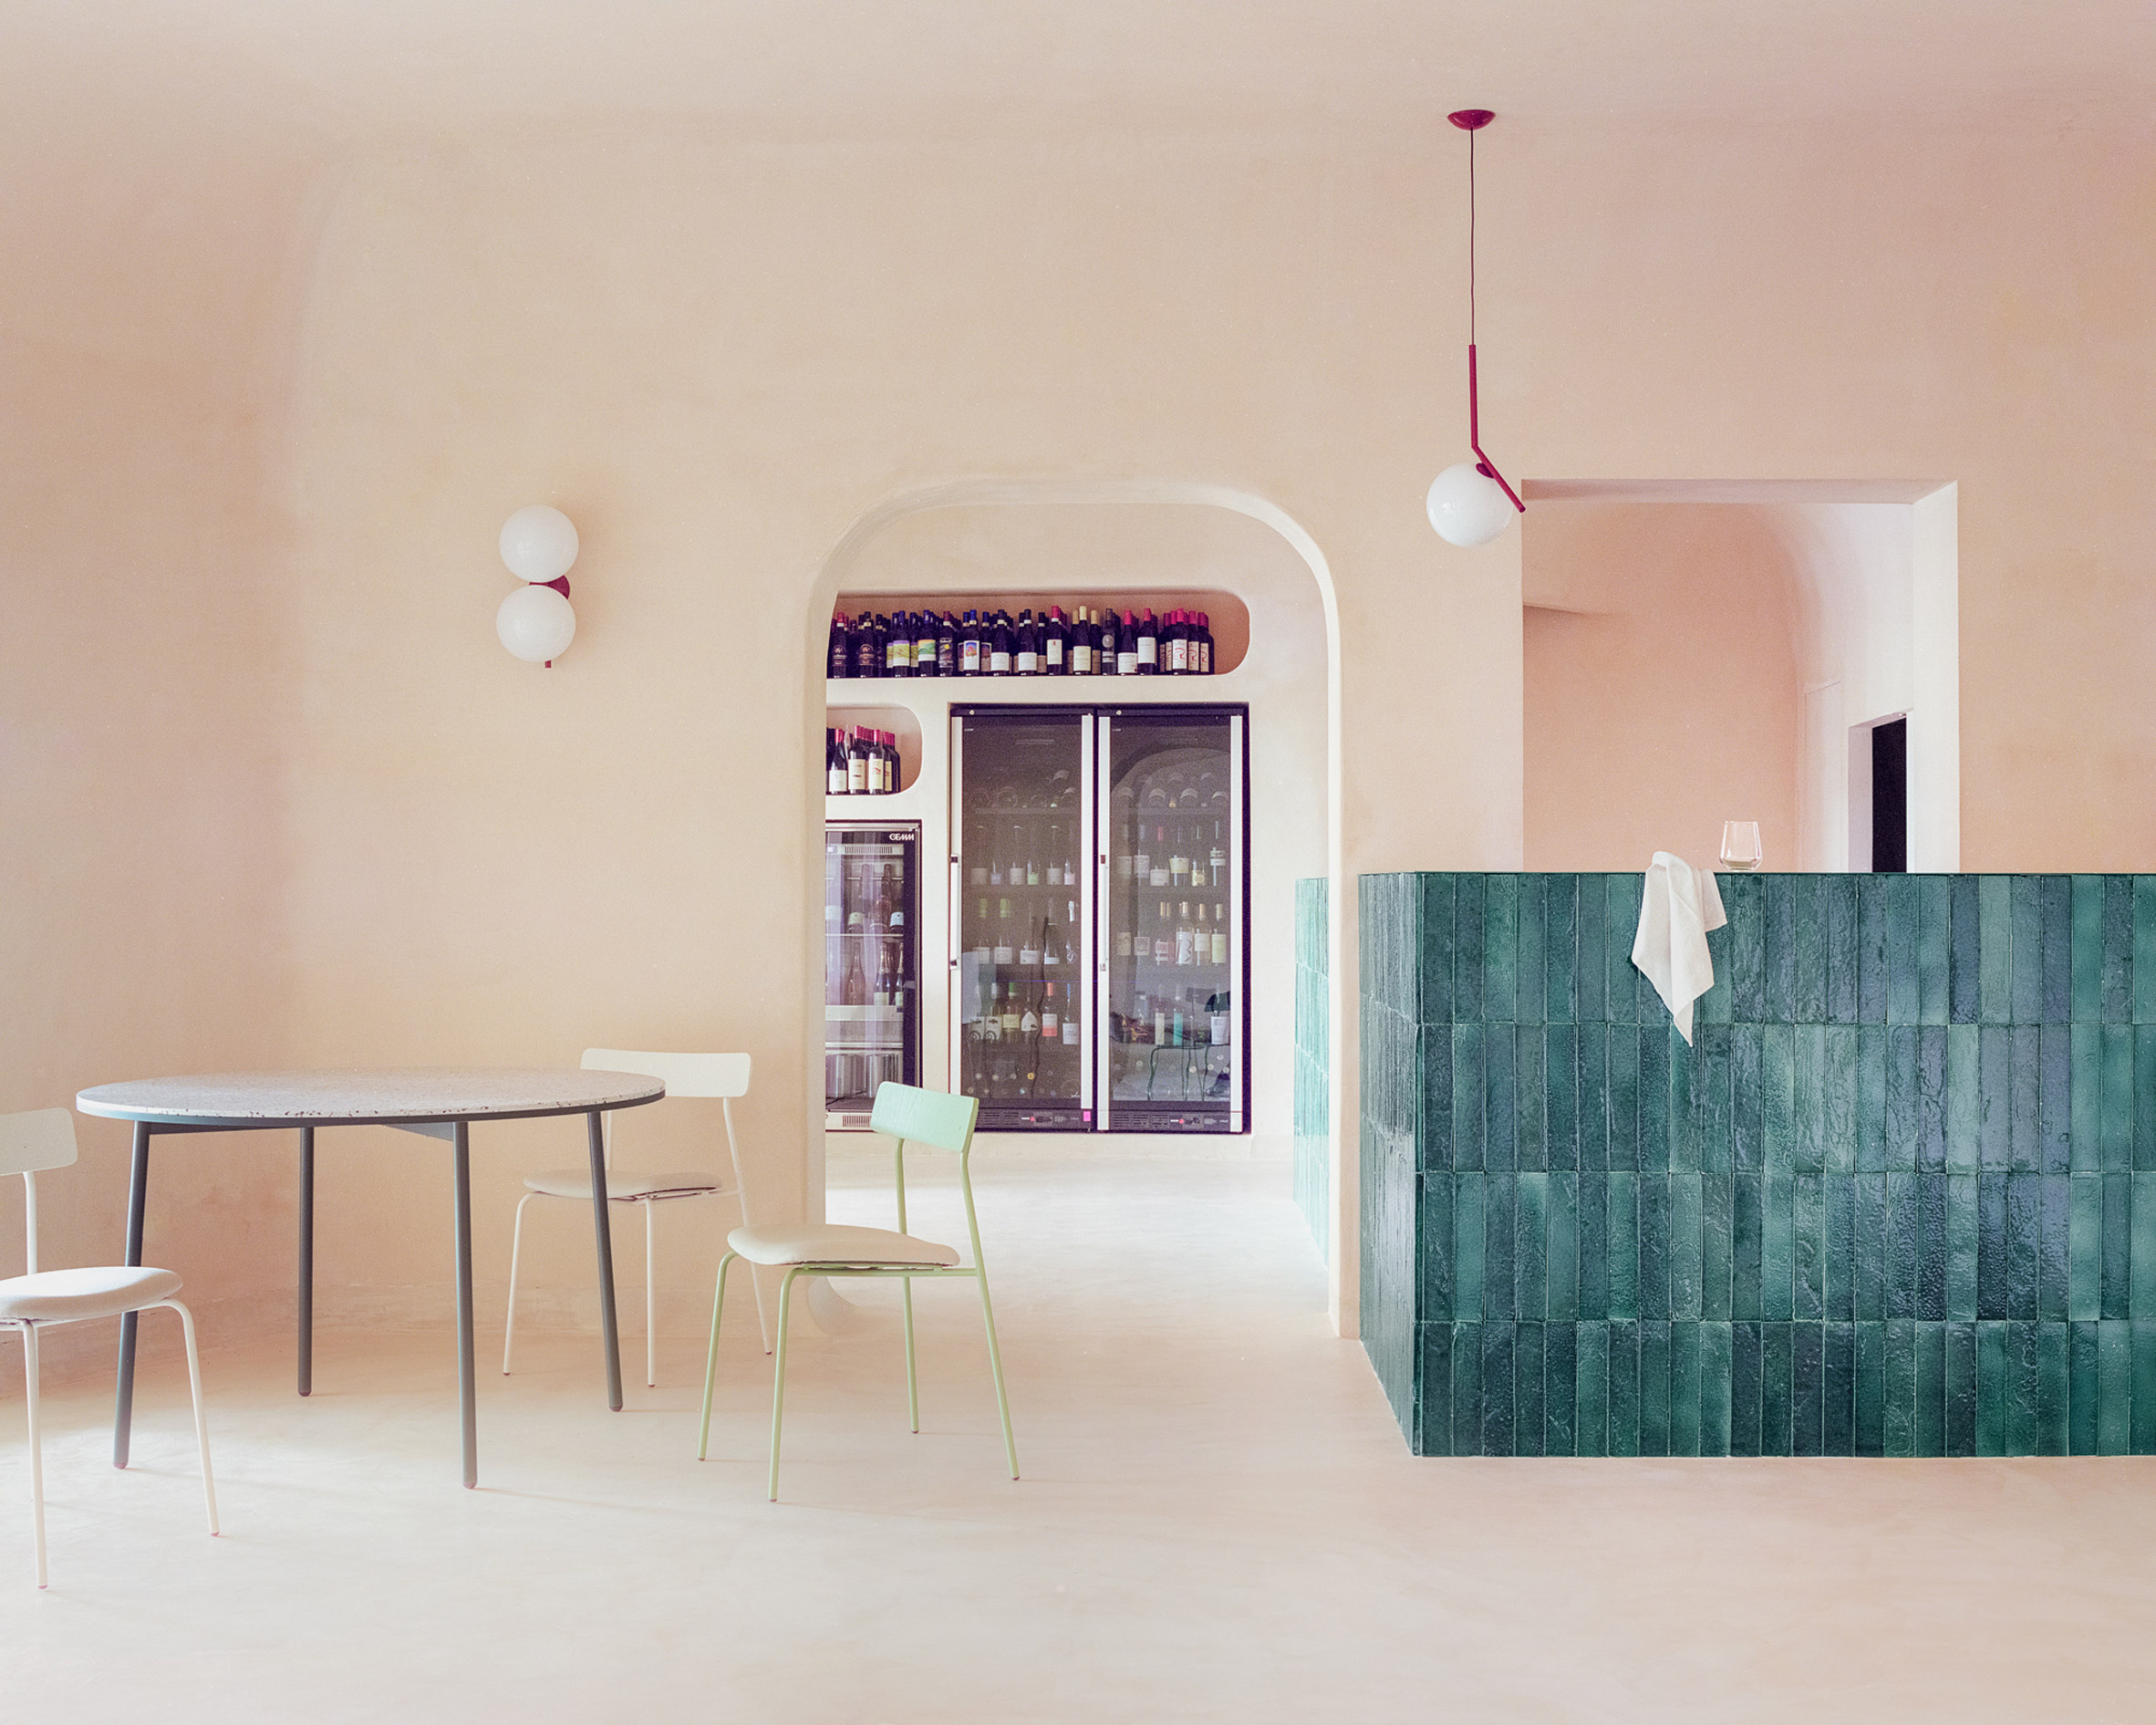 Green tiled counter next to seating area with views to wine fridge in Myrto pizzeria